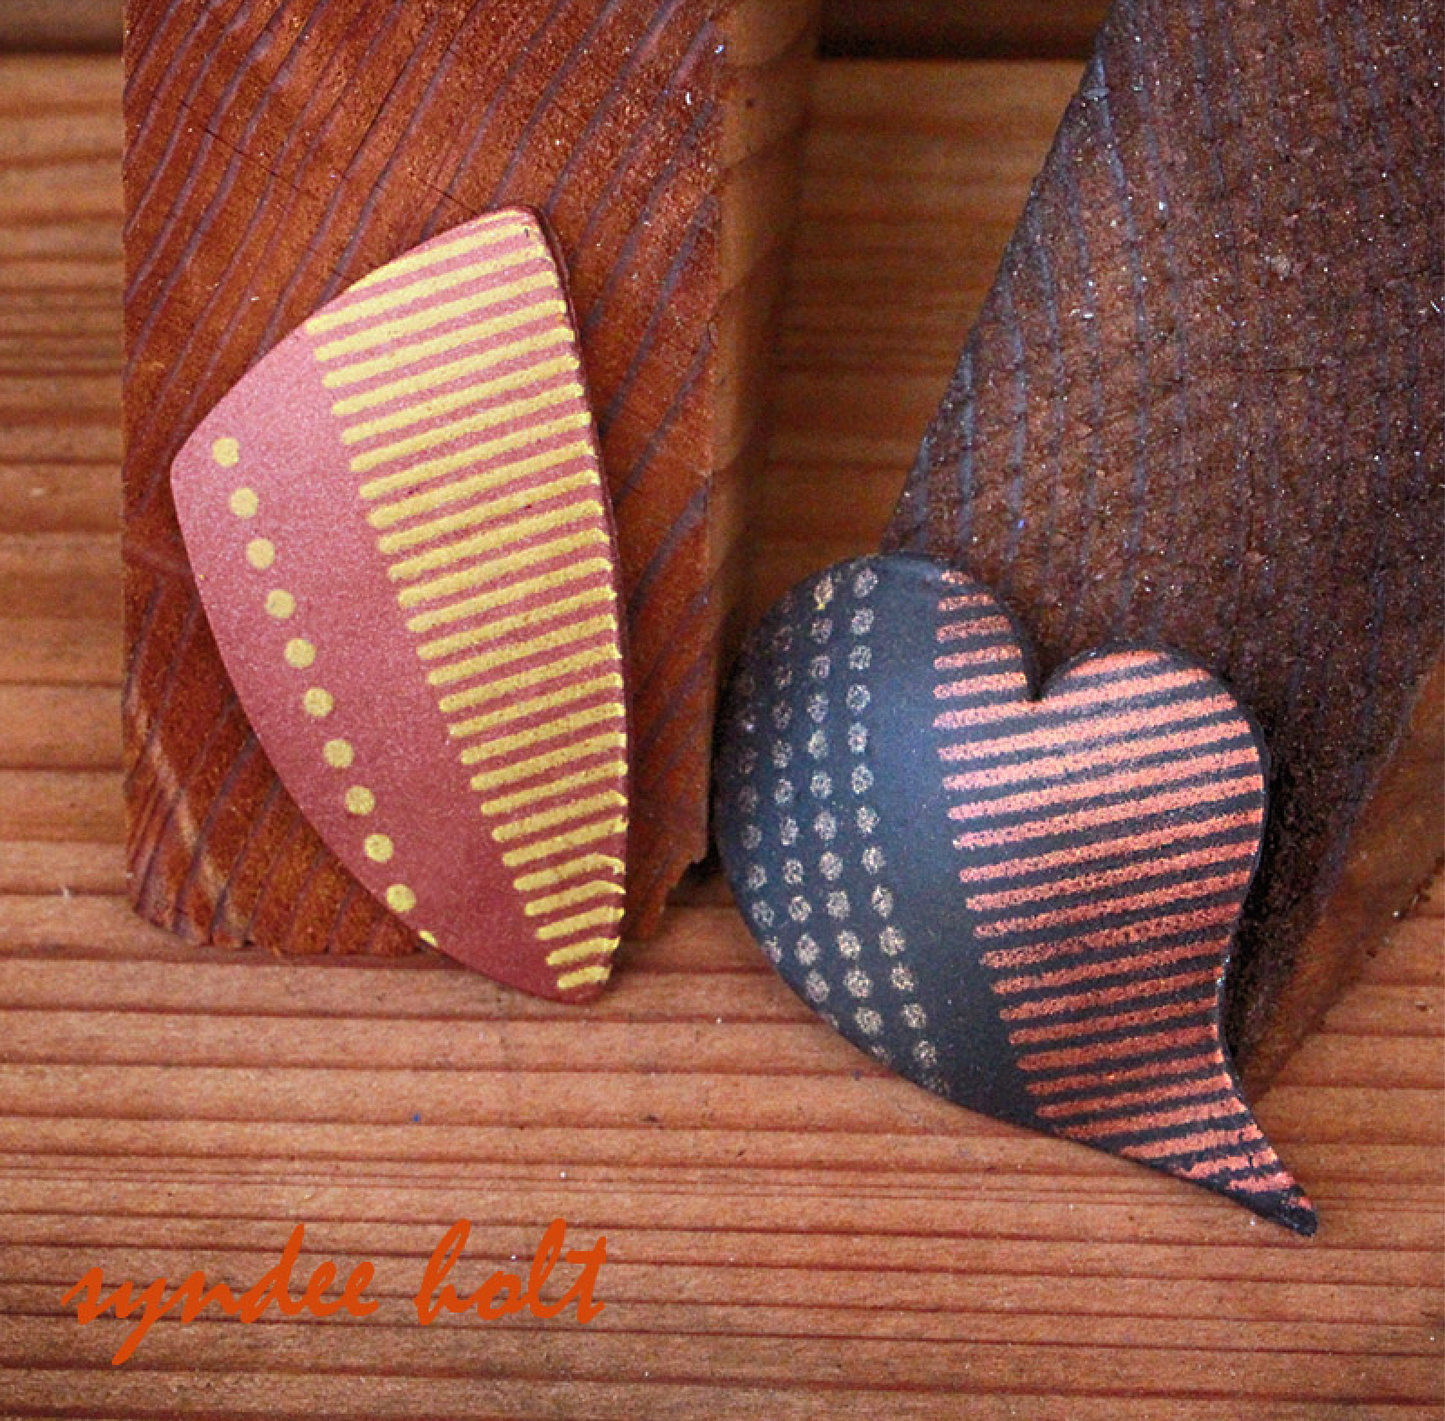 Syn’s #14 Stripes and Dots Geometric Silkscreen For Crafting Polymer Clay + Mixed Media